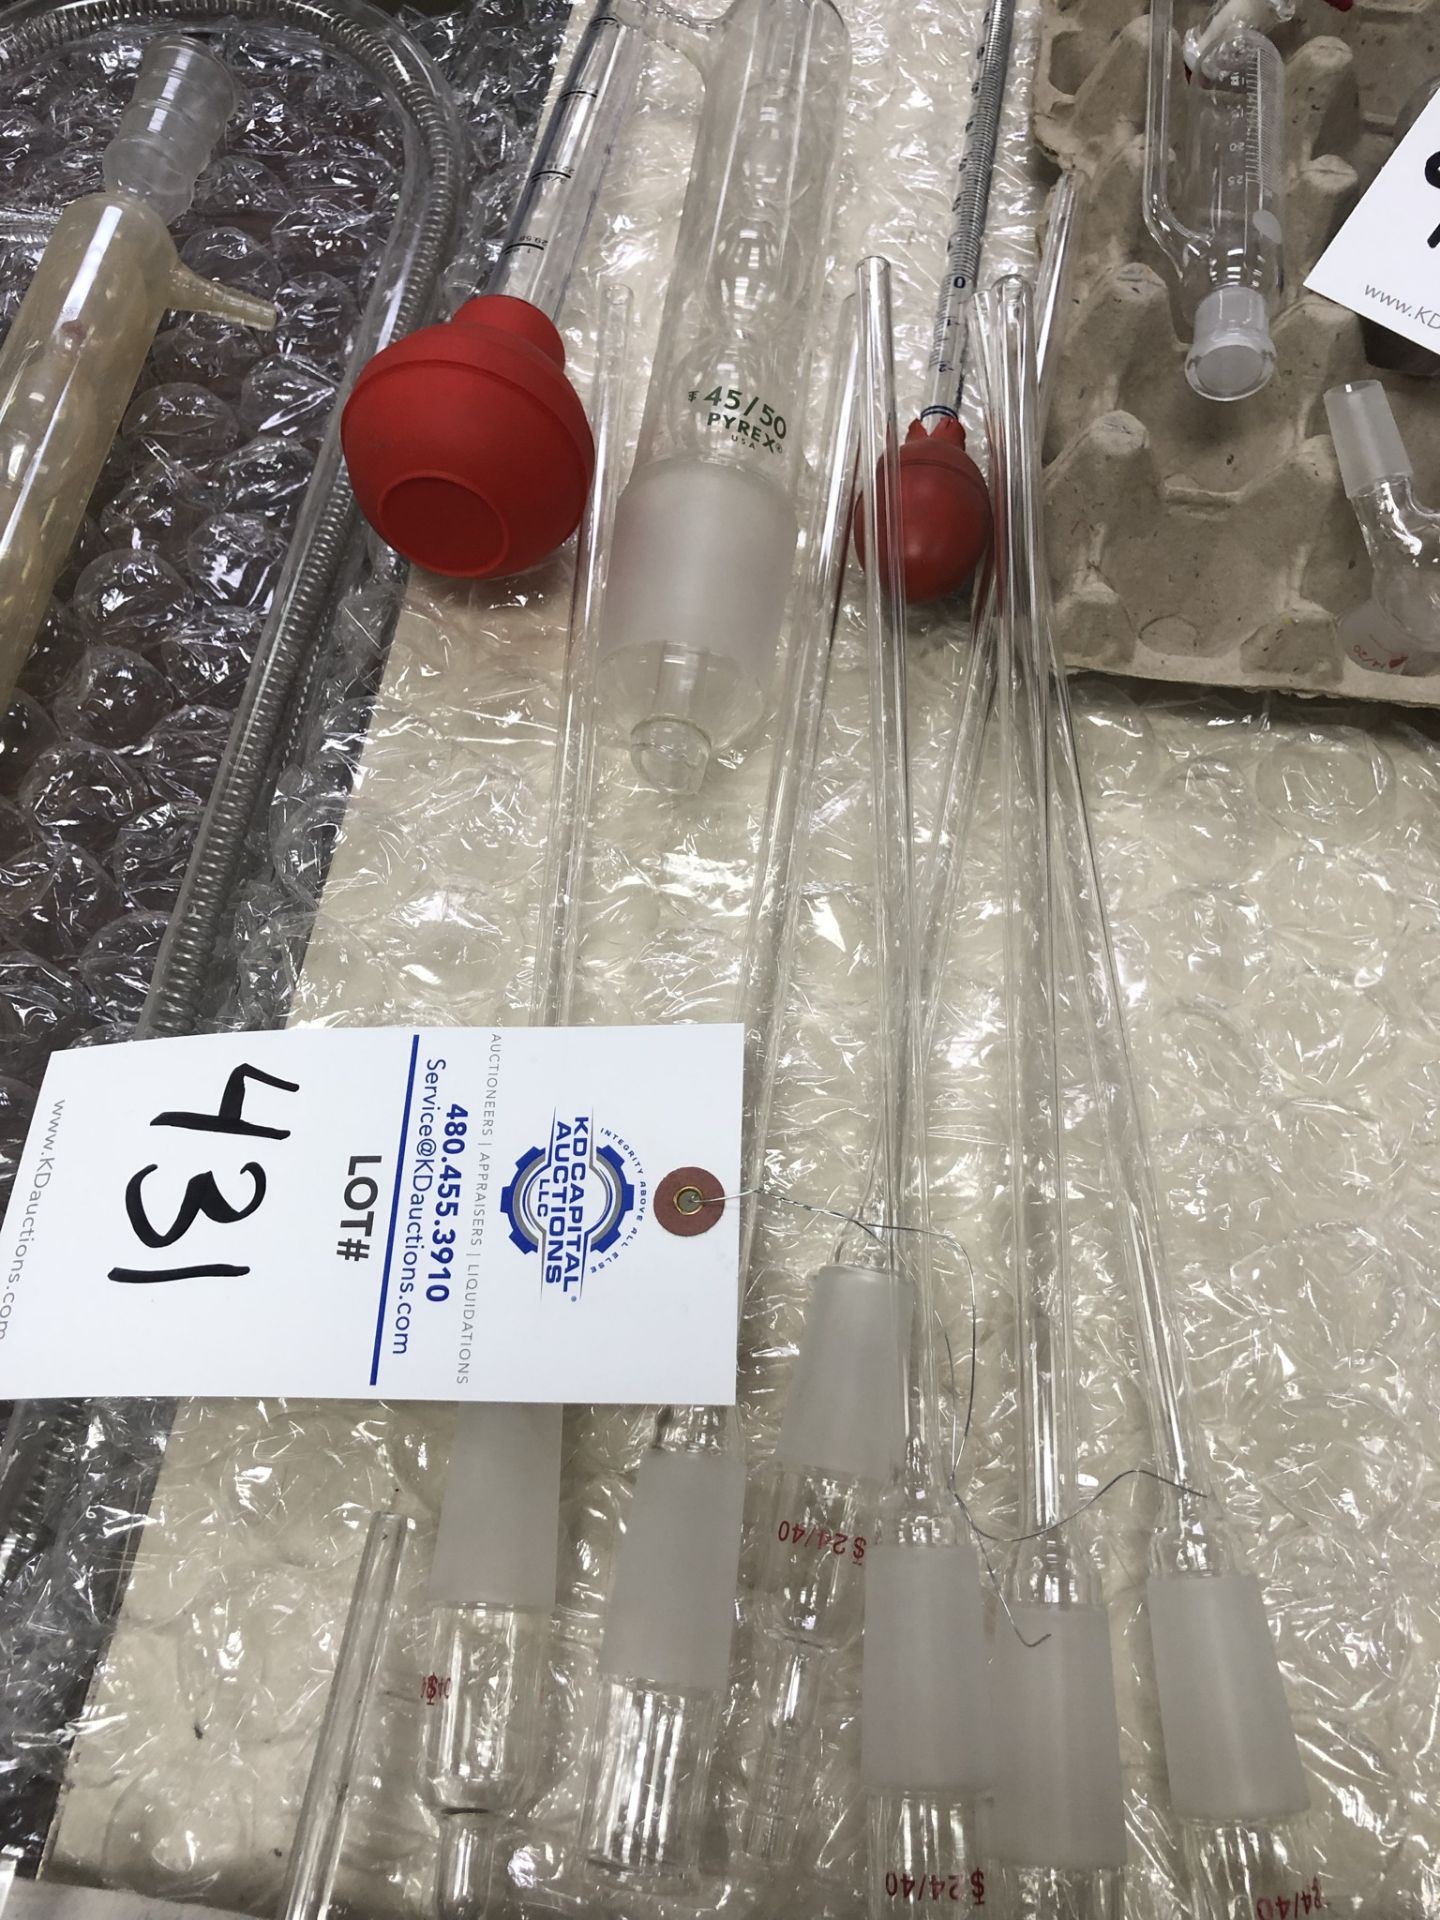 Lot of Misc. Glassware 24/40 Thermal Wells and Gas Sparges - Image 5 of 5